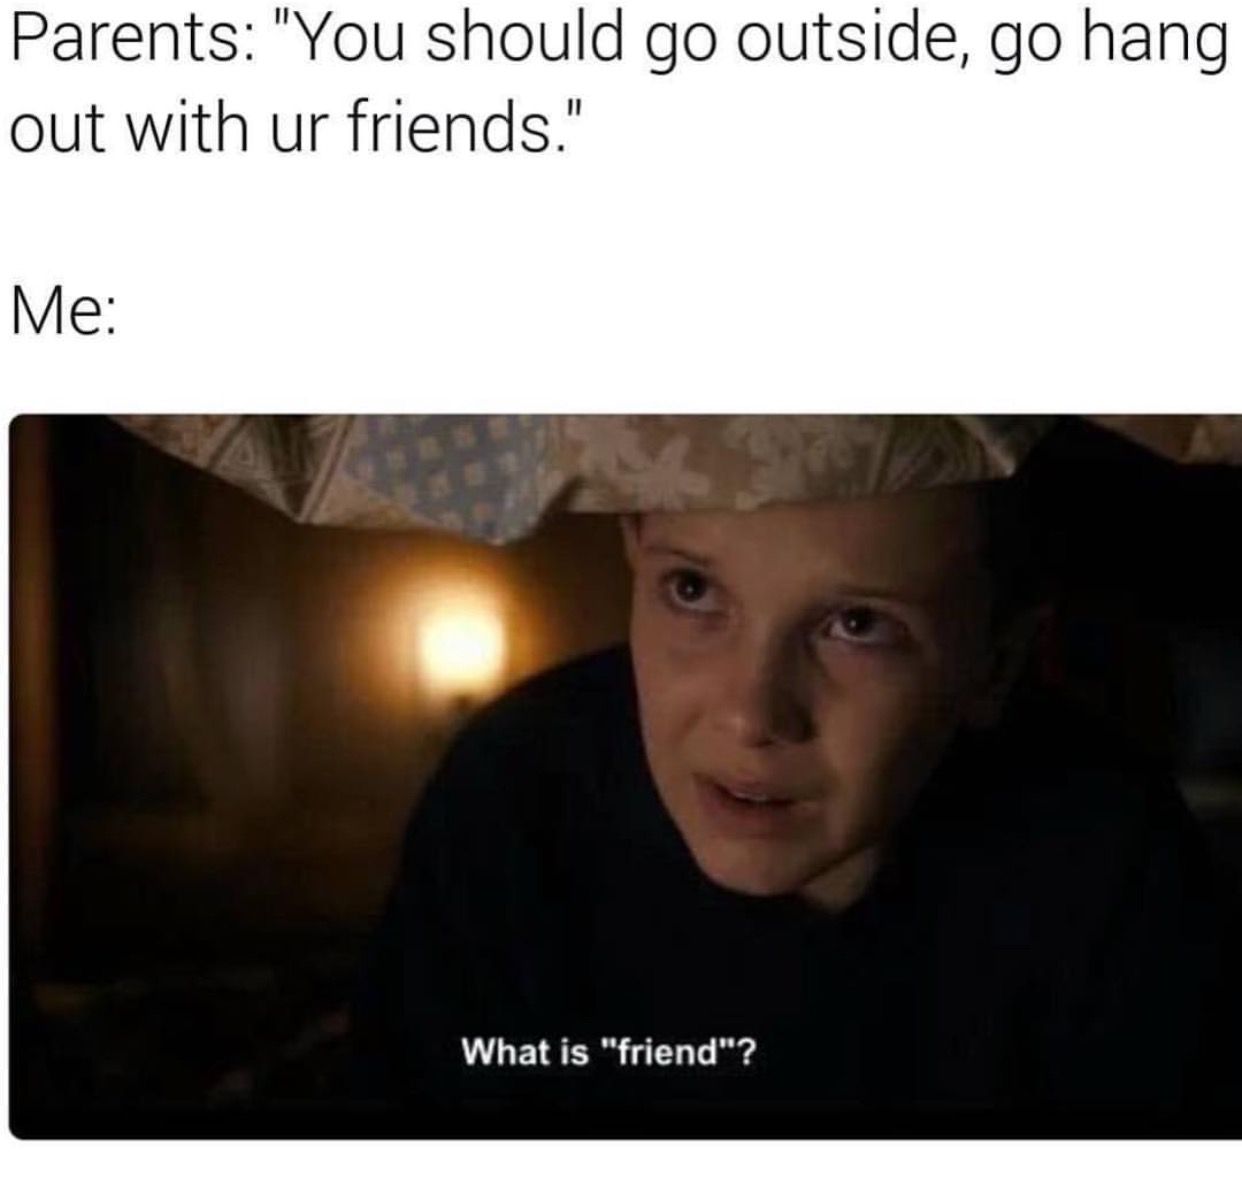 stranger things memes - Parents "You should go outside, go hang out with ur friends." Me What is "friend"?